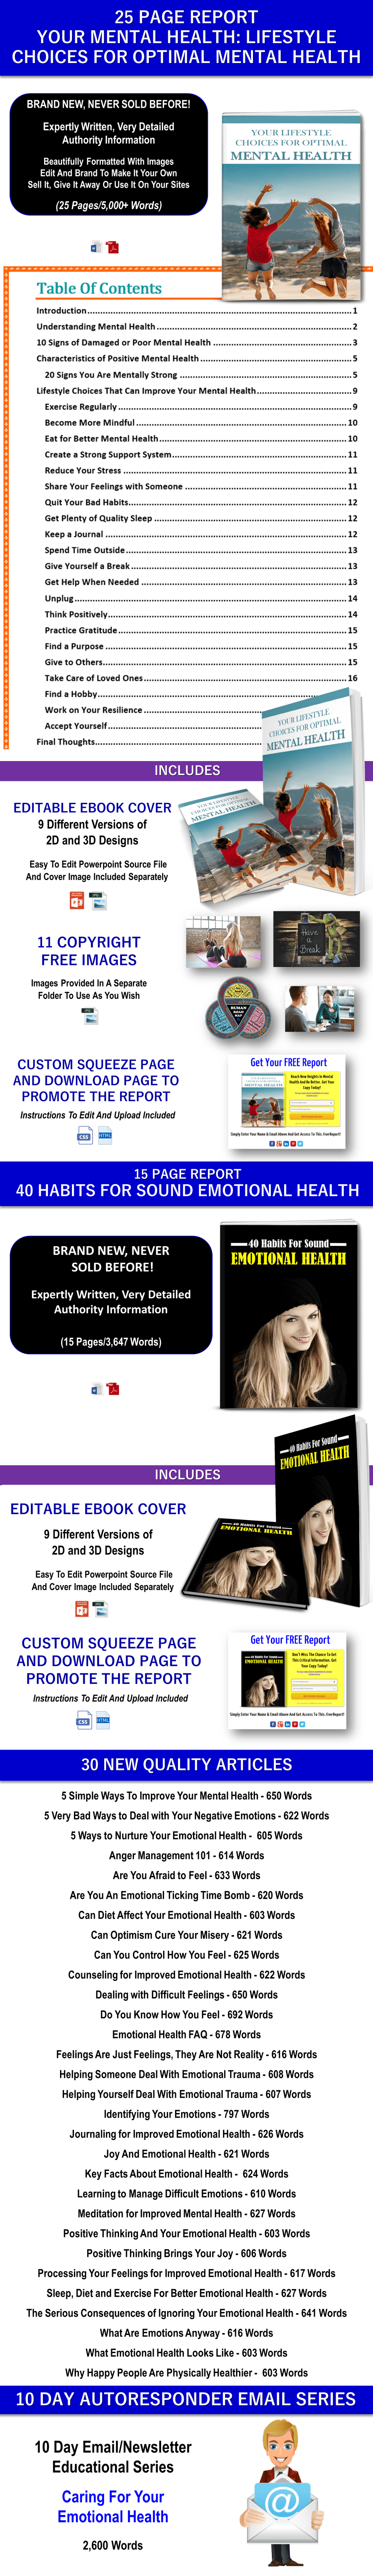 Mental Health and Emotional Health Content with PLR Rights